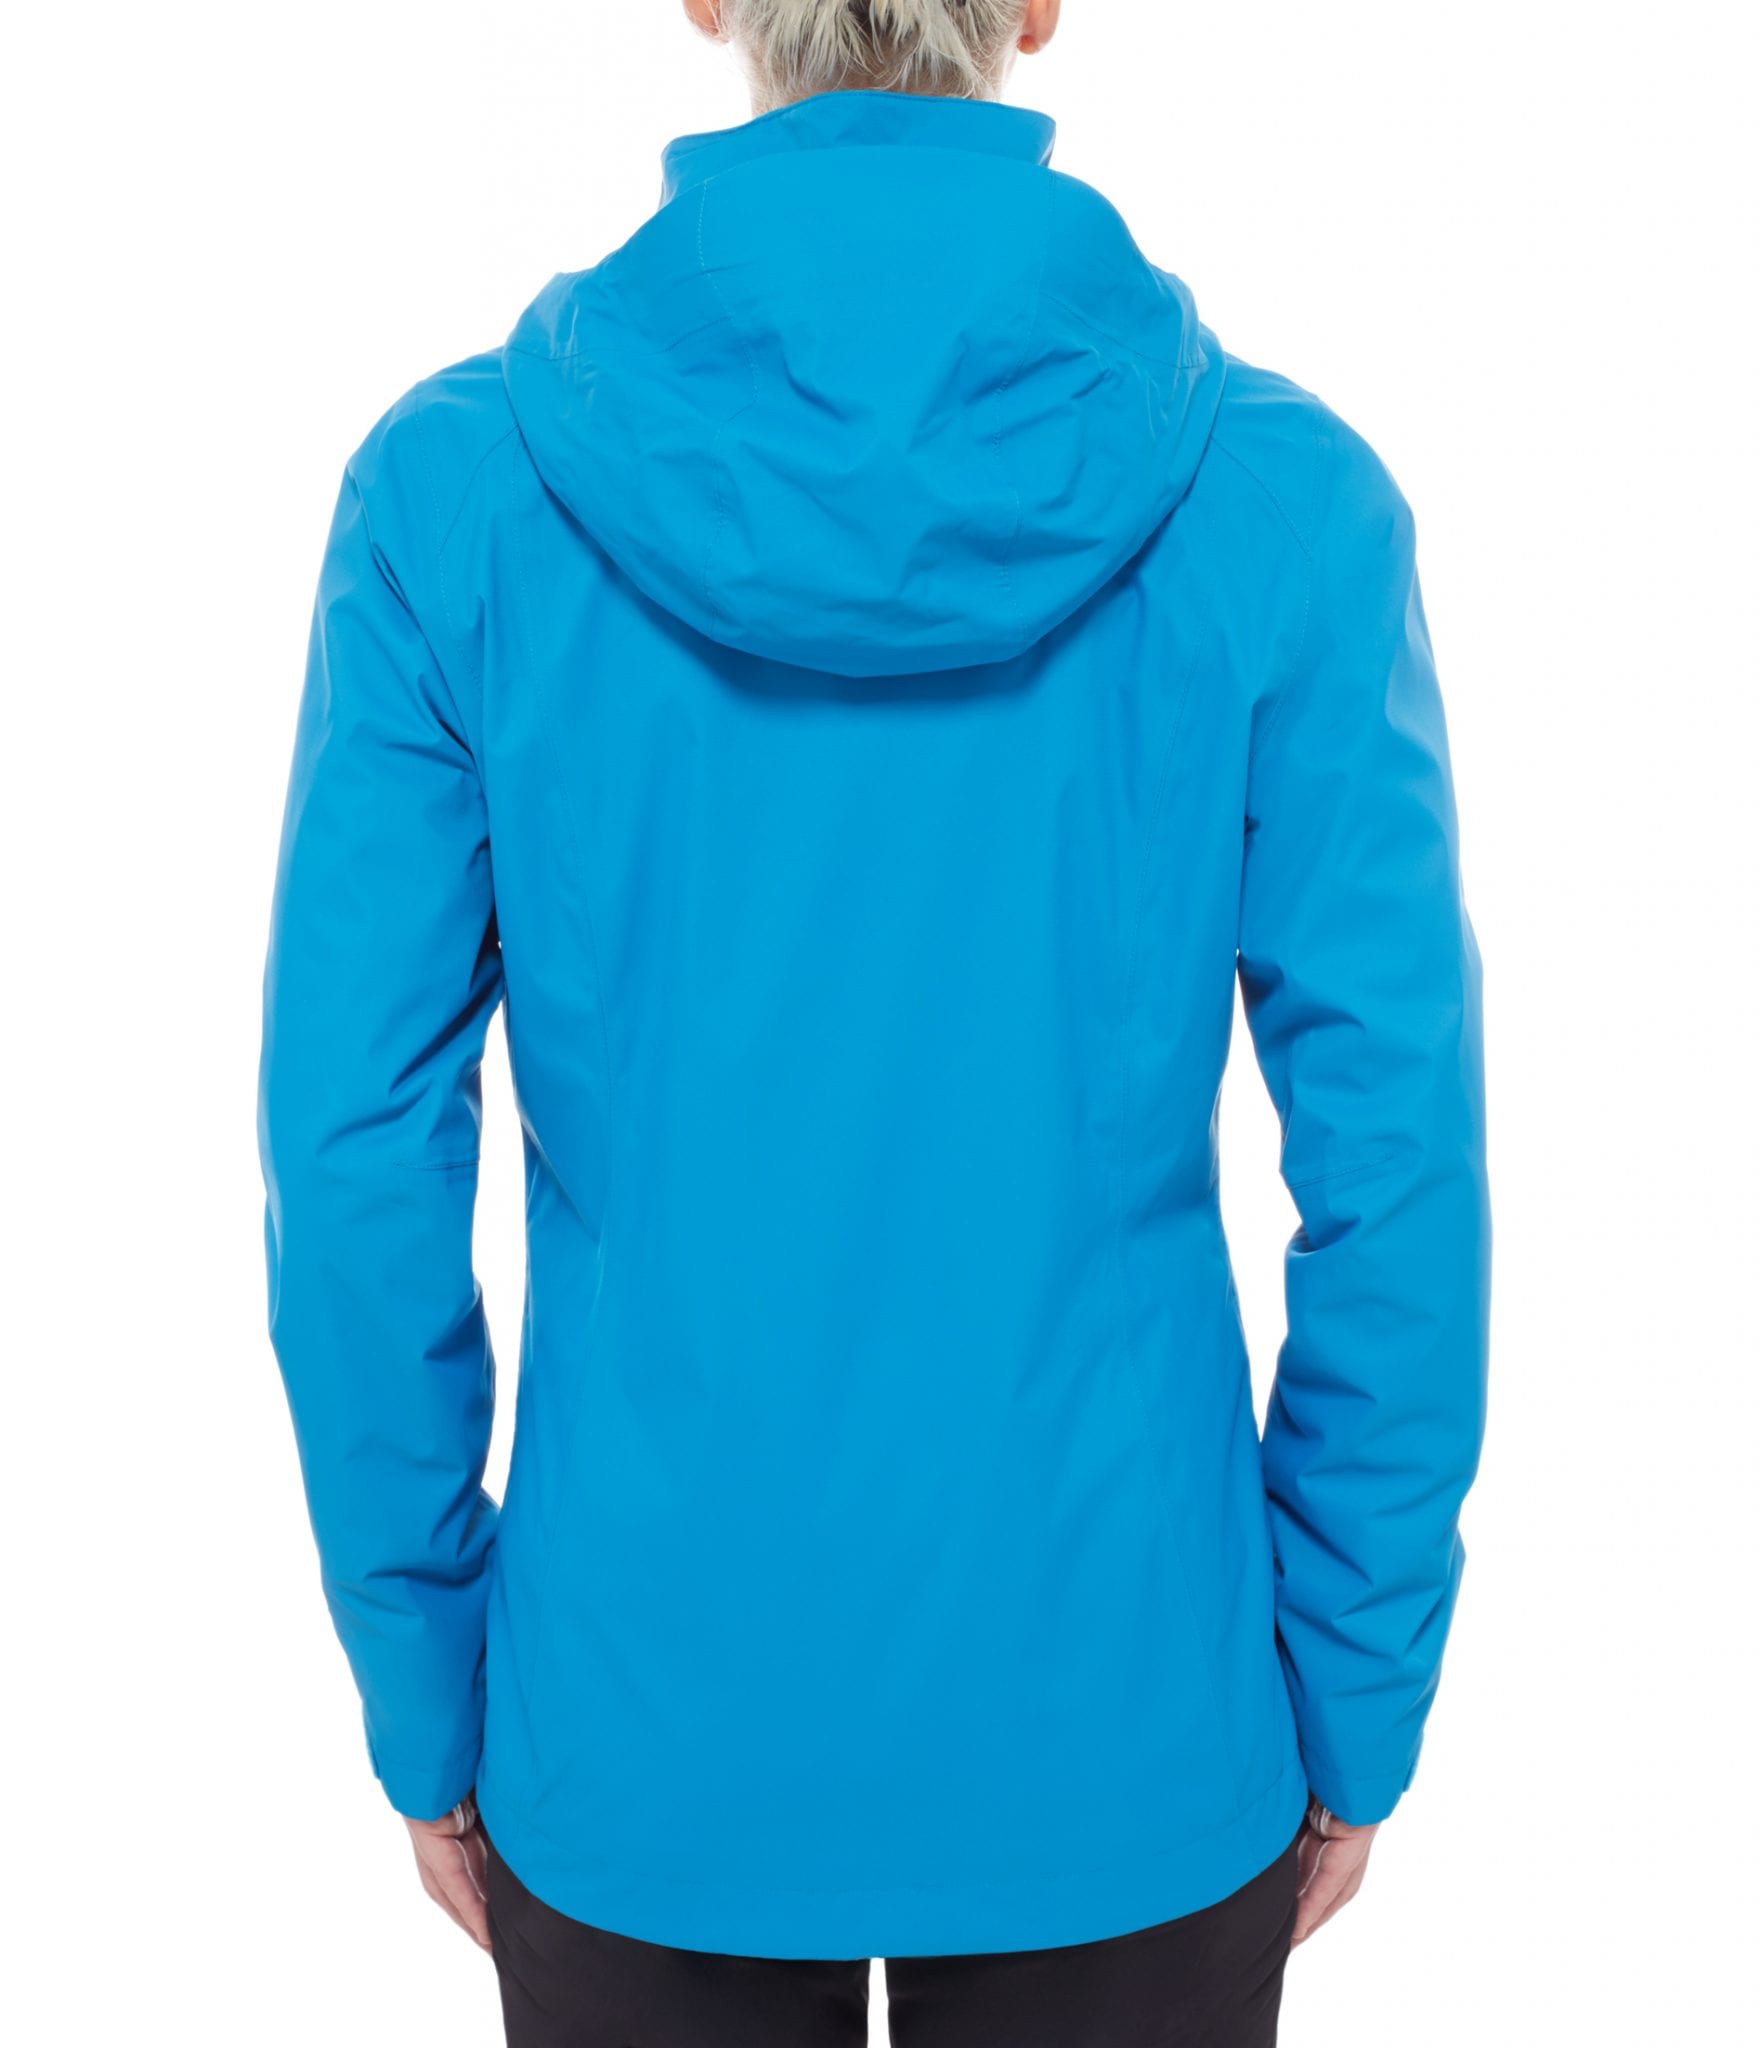 W North jacket Evolve blue triclimate The Face Danish | shop II – o-zone :